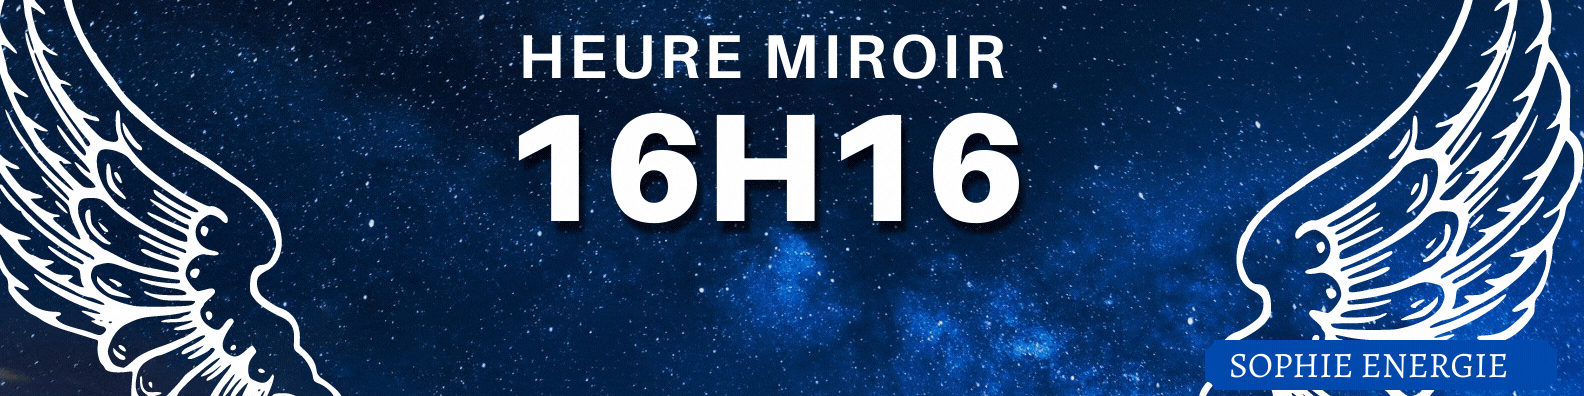 HEURE MIROIR anges 16h16